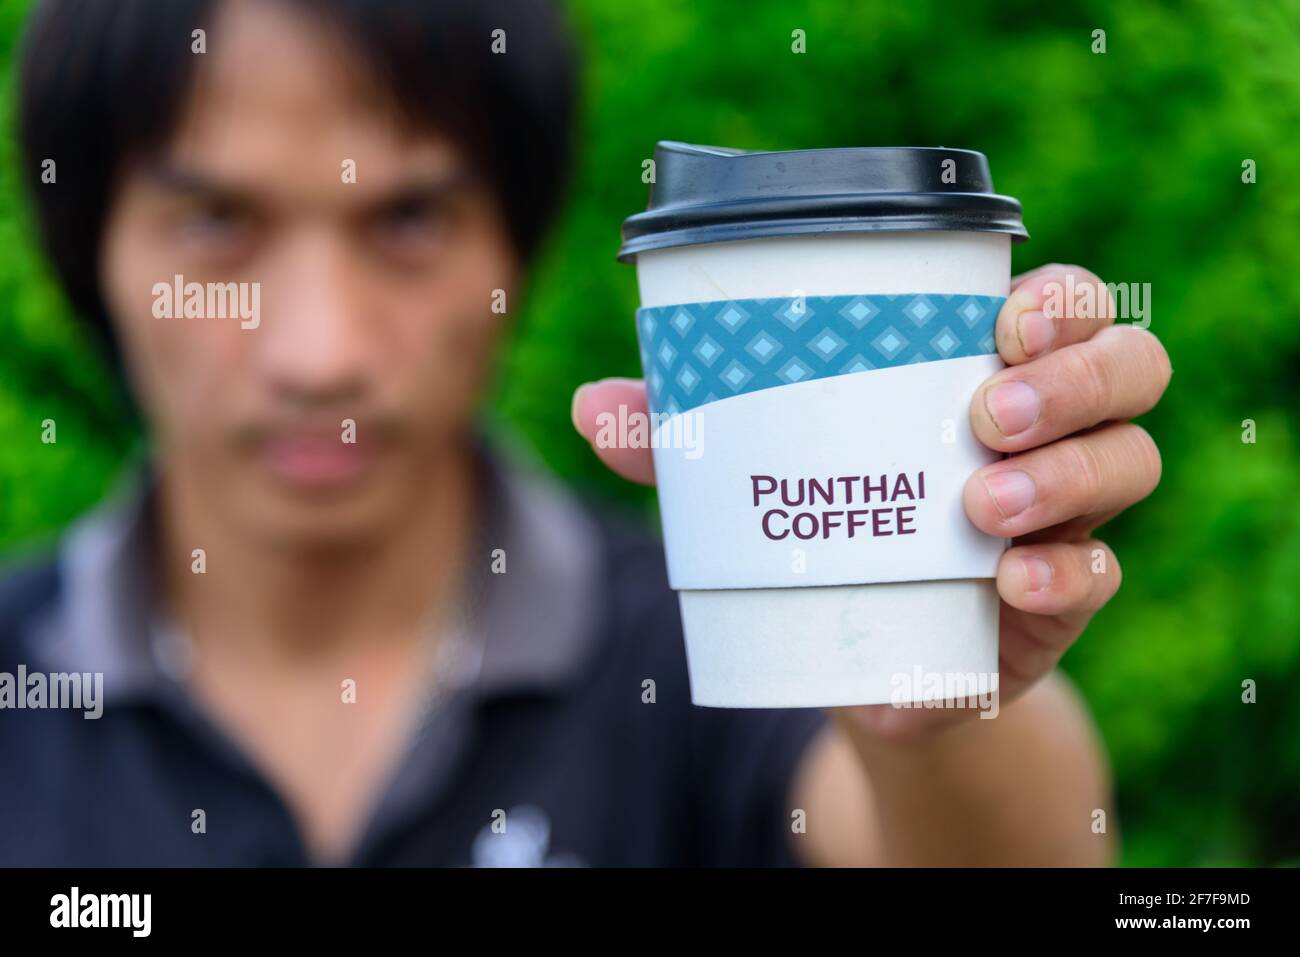 Bangkok,Thailand - 6 April, 2021: The man hold the paper cup of Punthai coffee Stock Photo